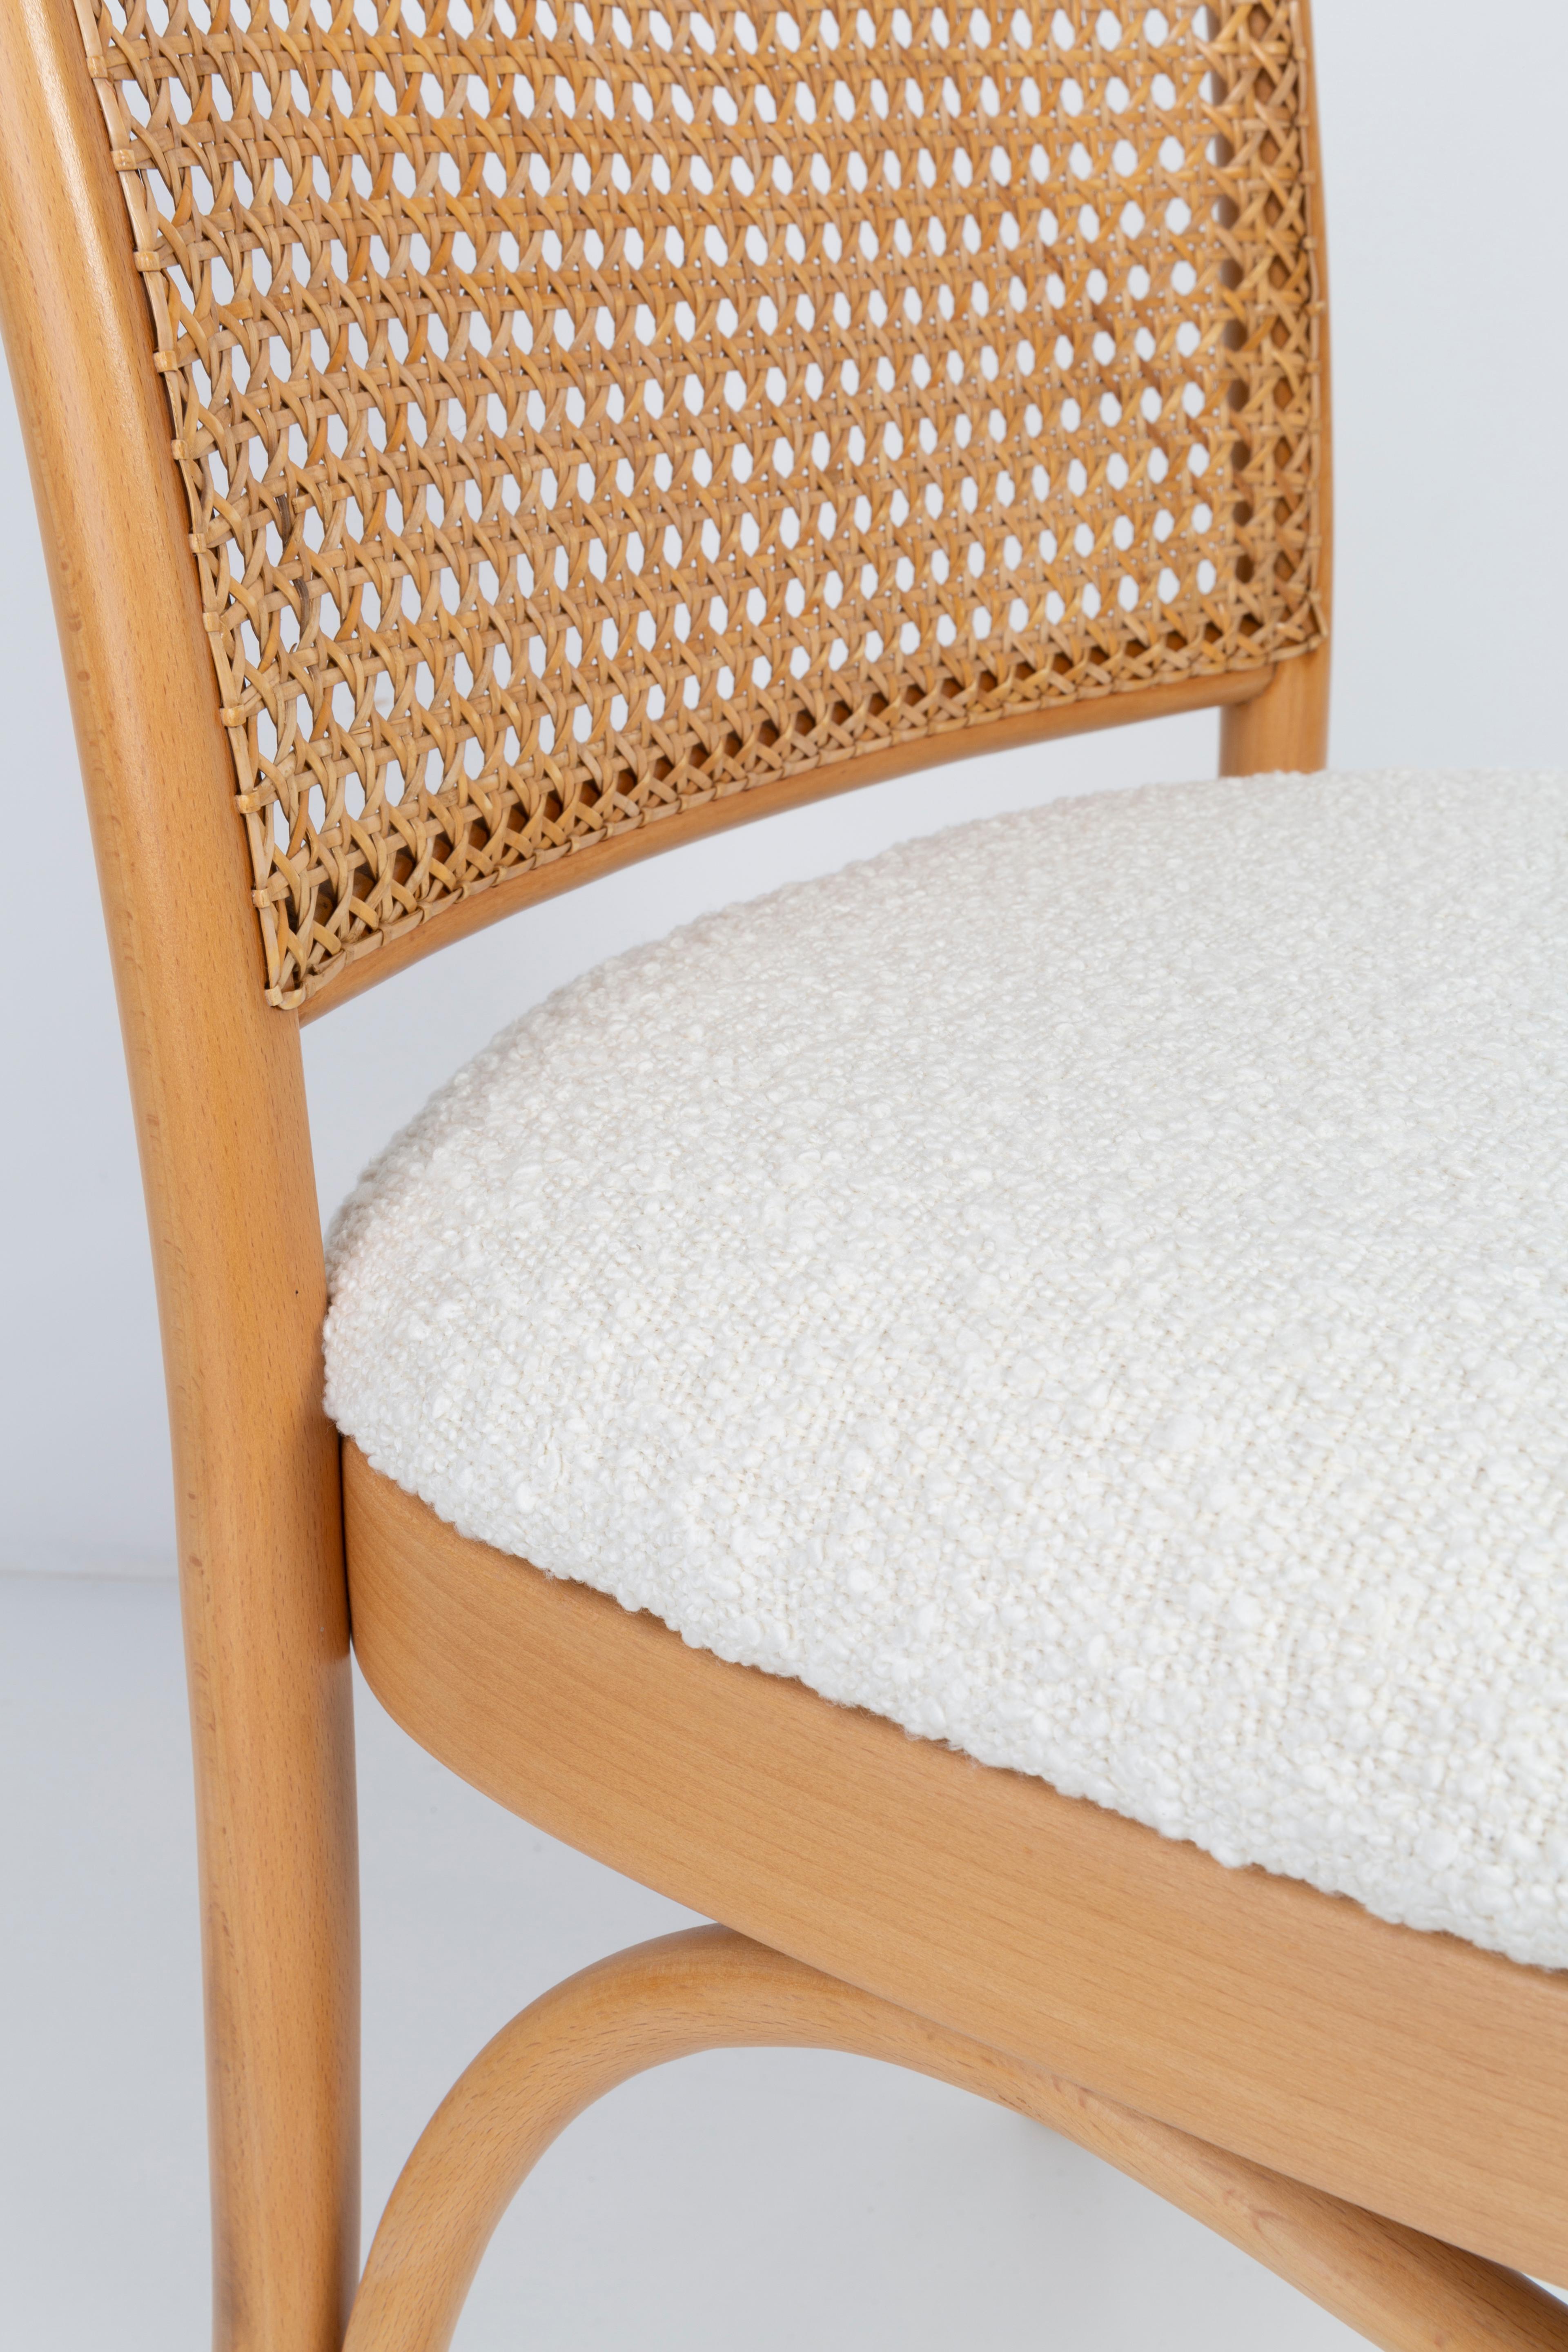 Light White Boucle Thonet Wood Rattan Chair, 1960s For Sale 6